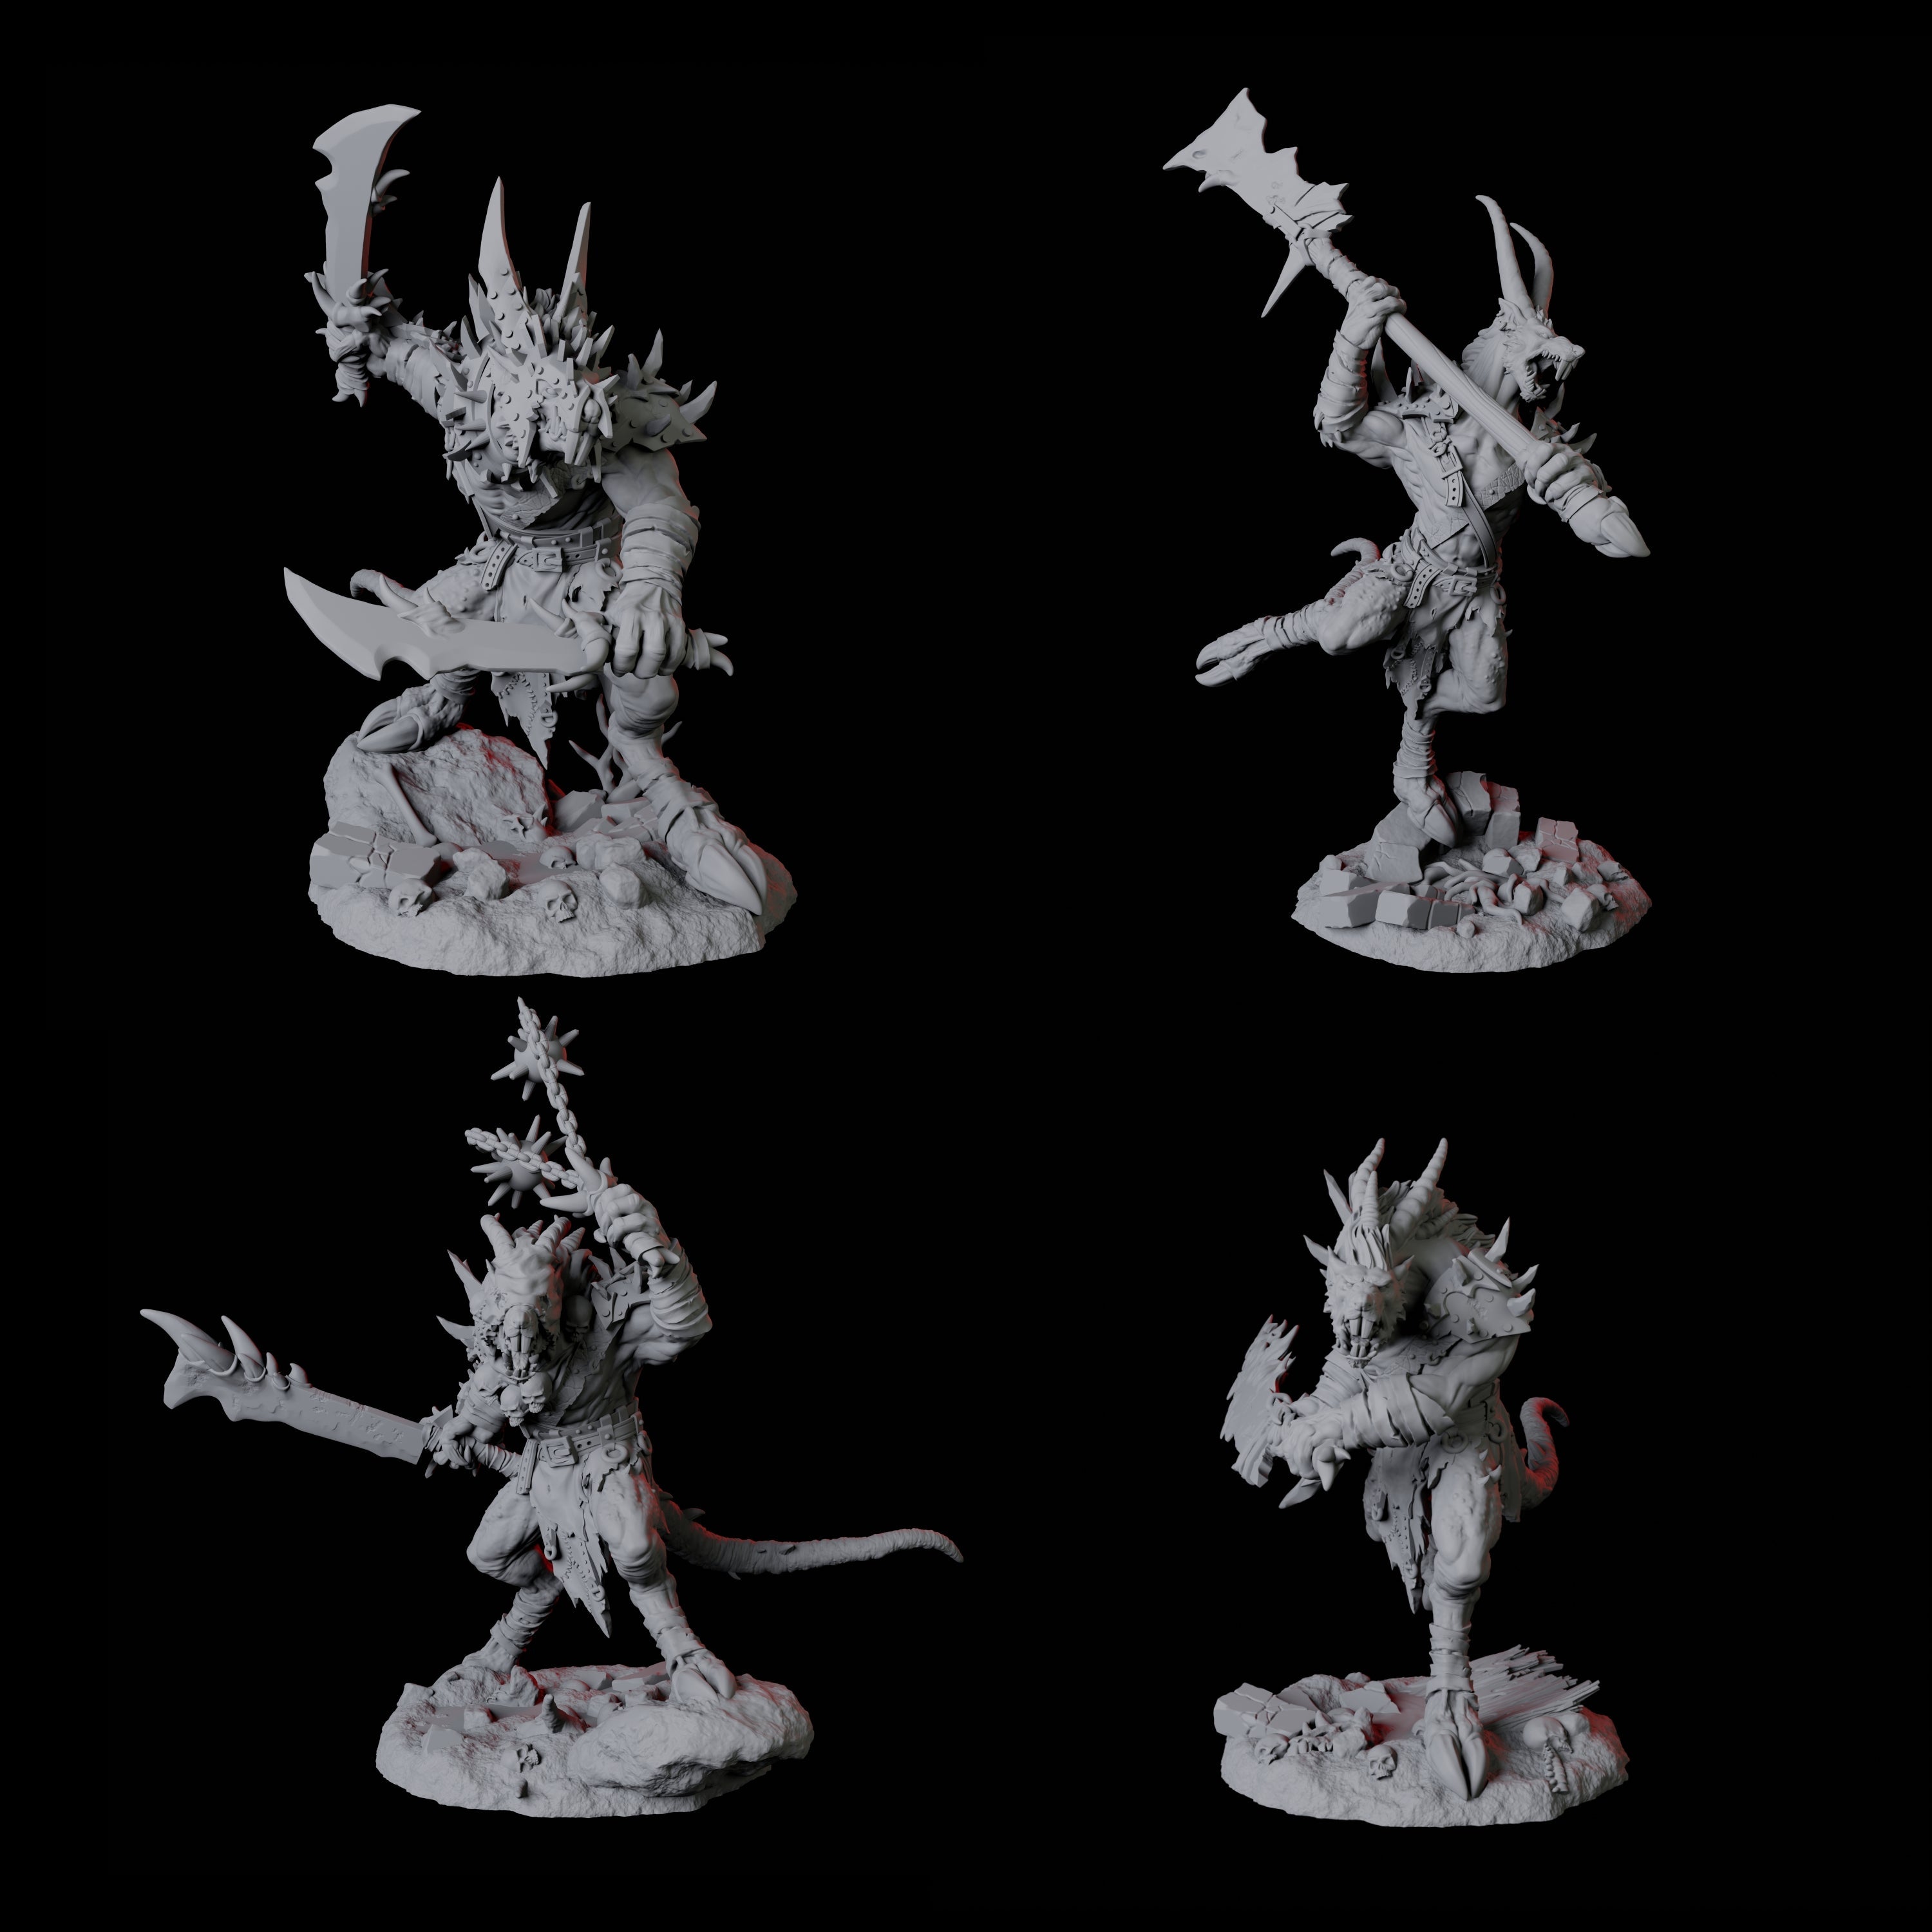 Four Blackfang Mutant Ratfolk Miniature for Dungeons and Dragons, Pathfinder or other TTRPGs